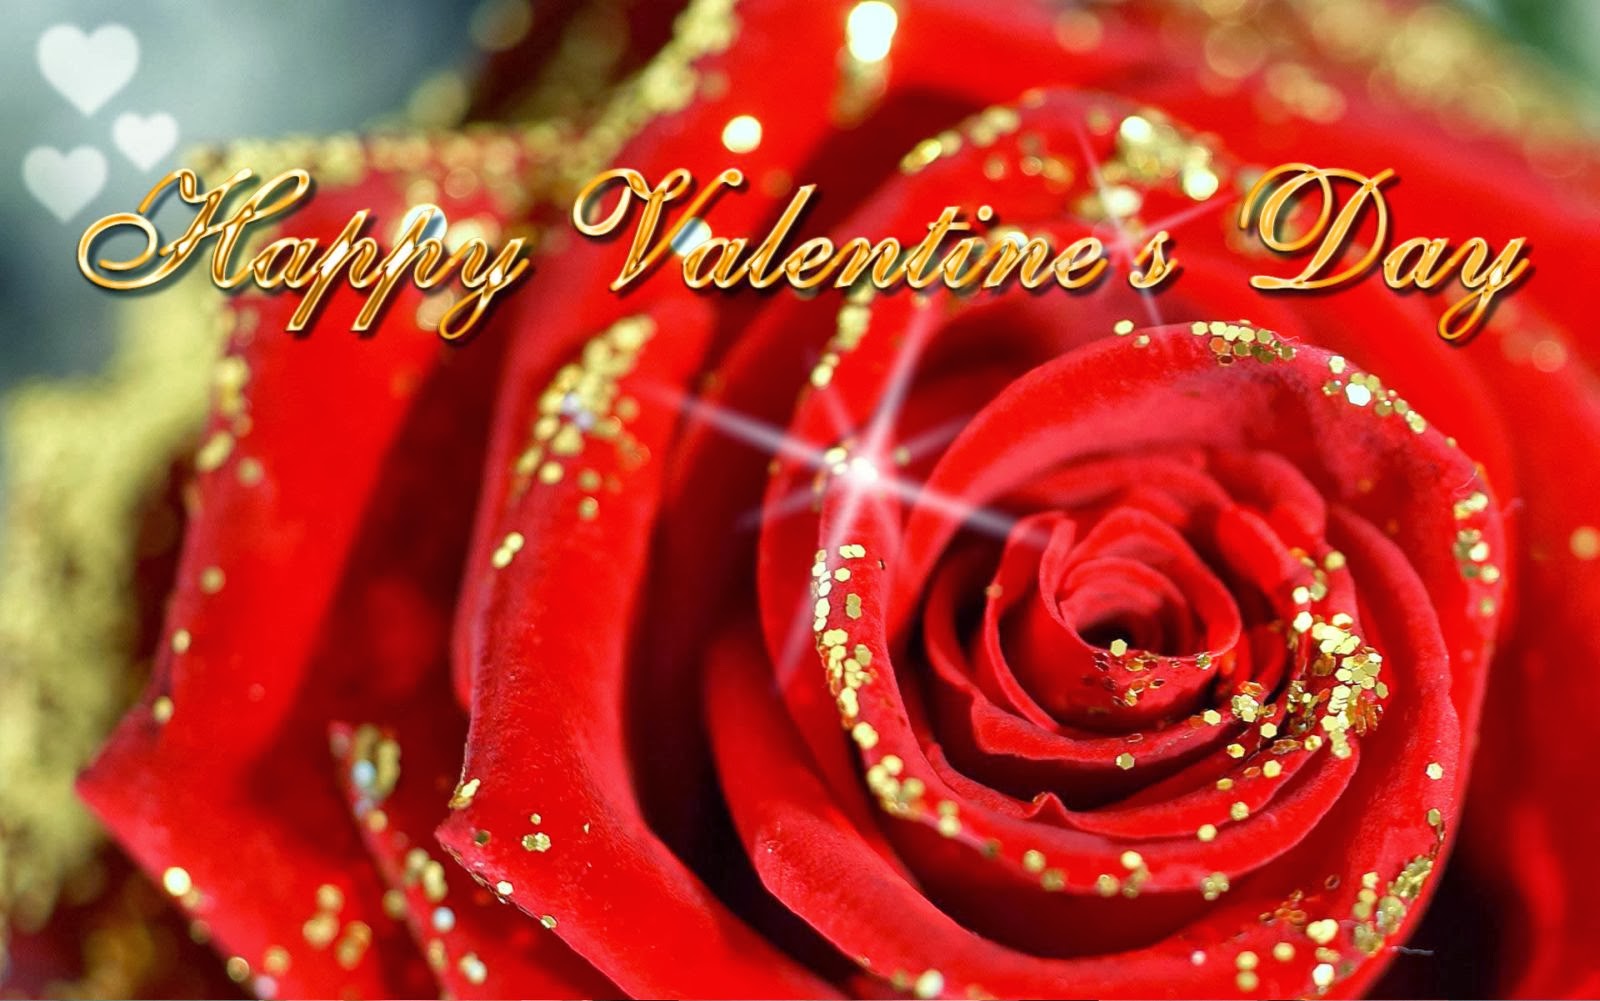 Beautiful Wallpapers and Images Valentine day wallpaper free